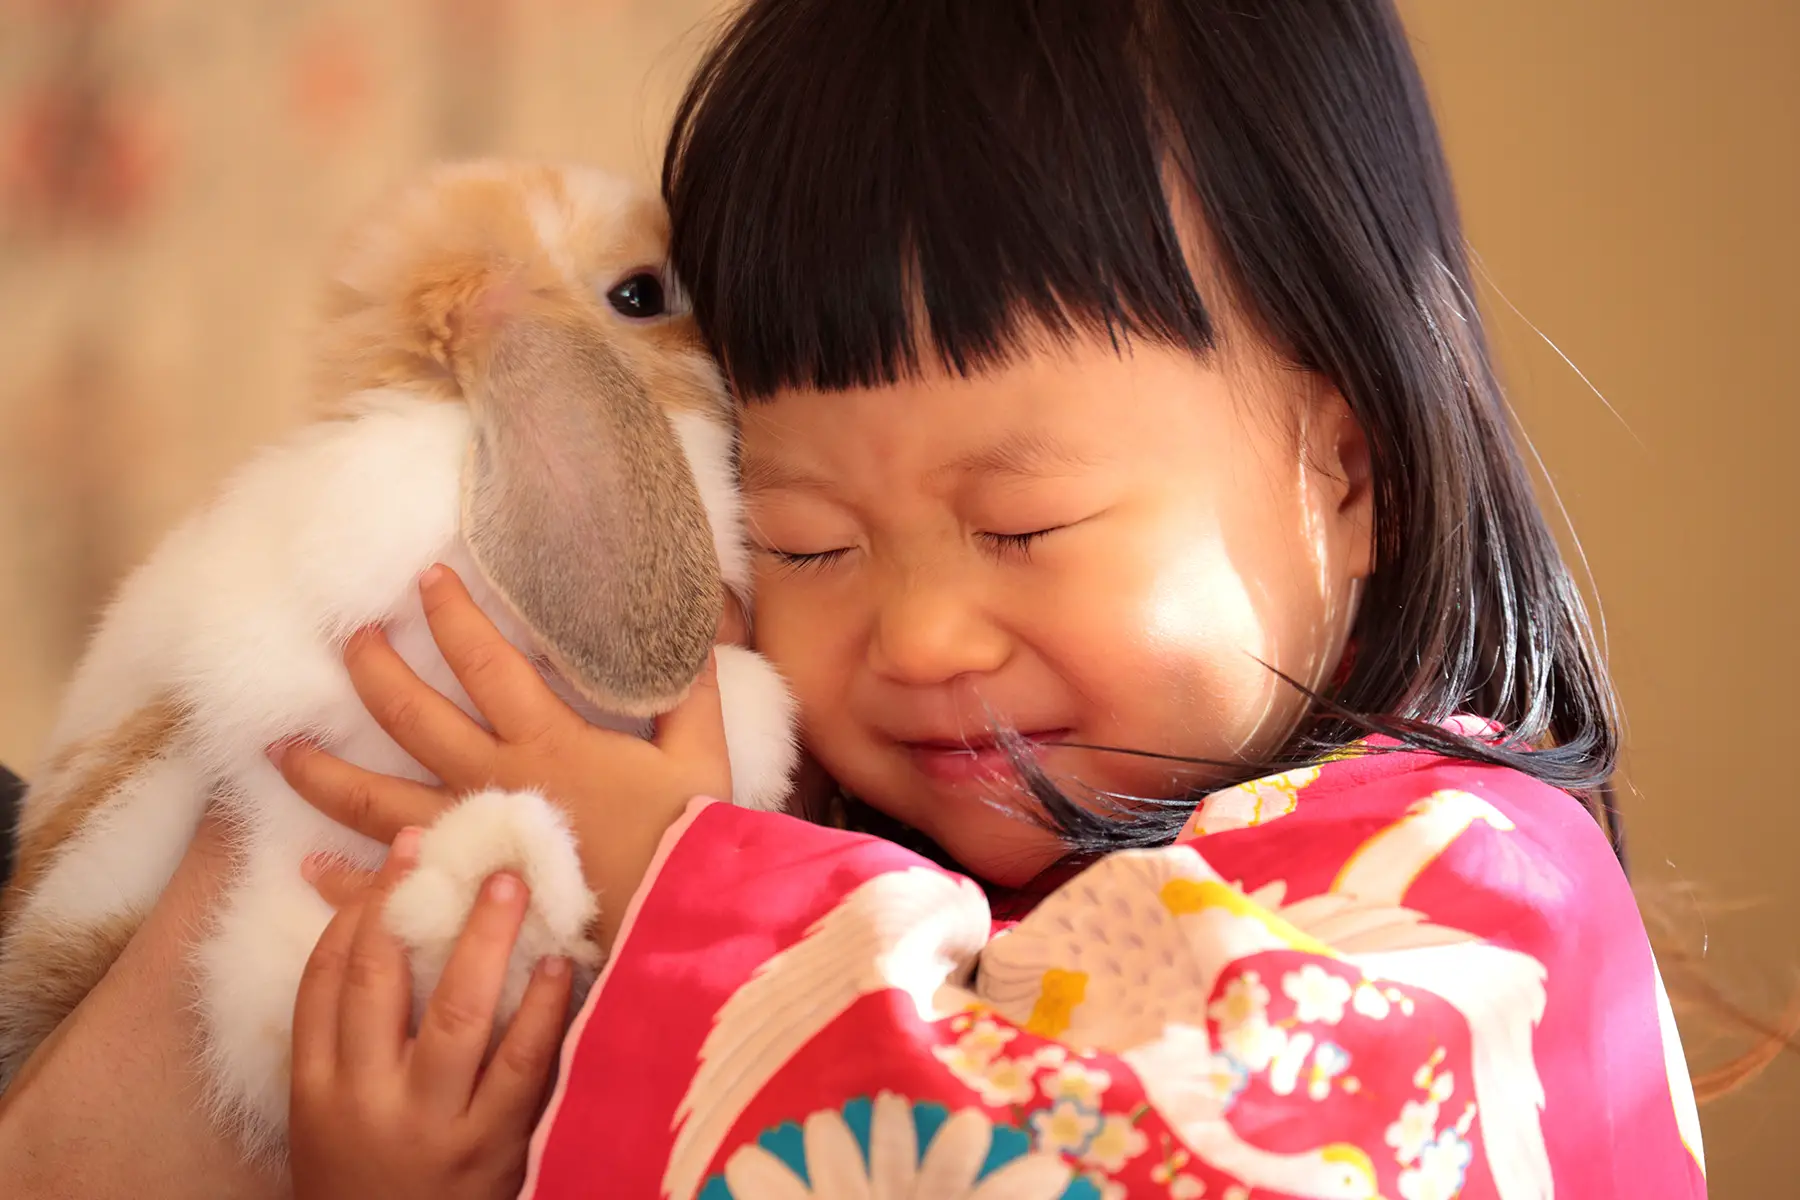 A young child hugging a rabbit